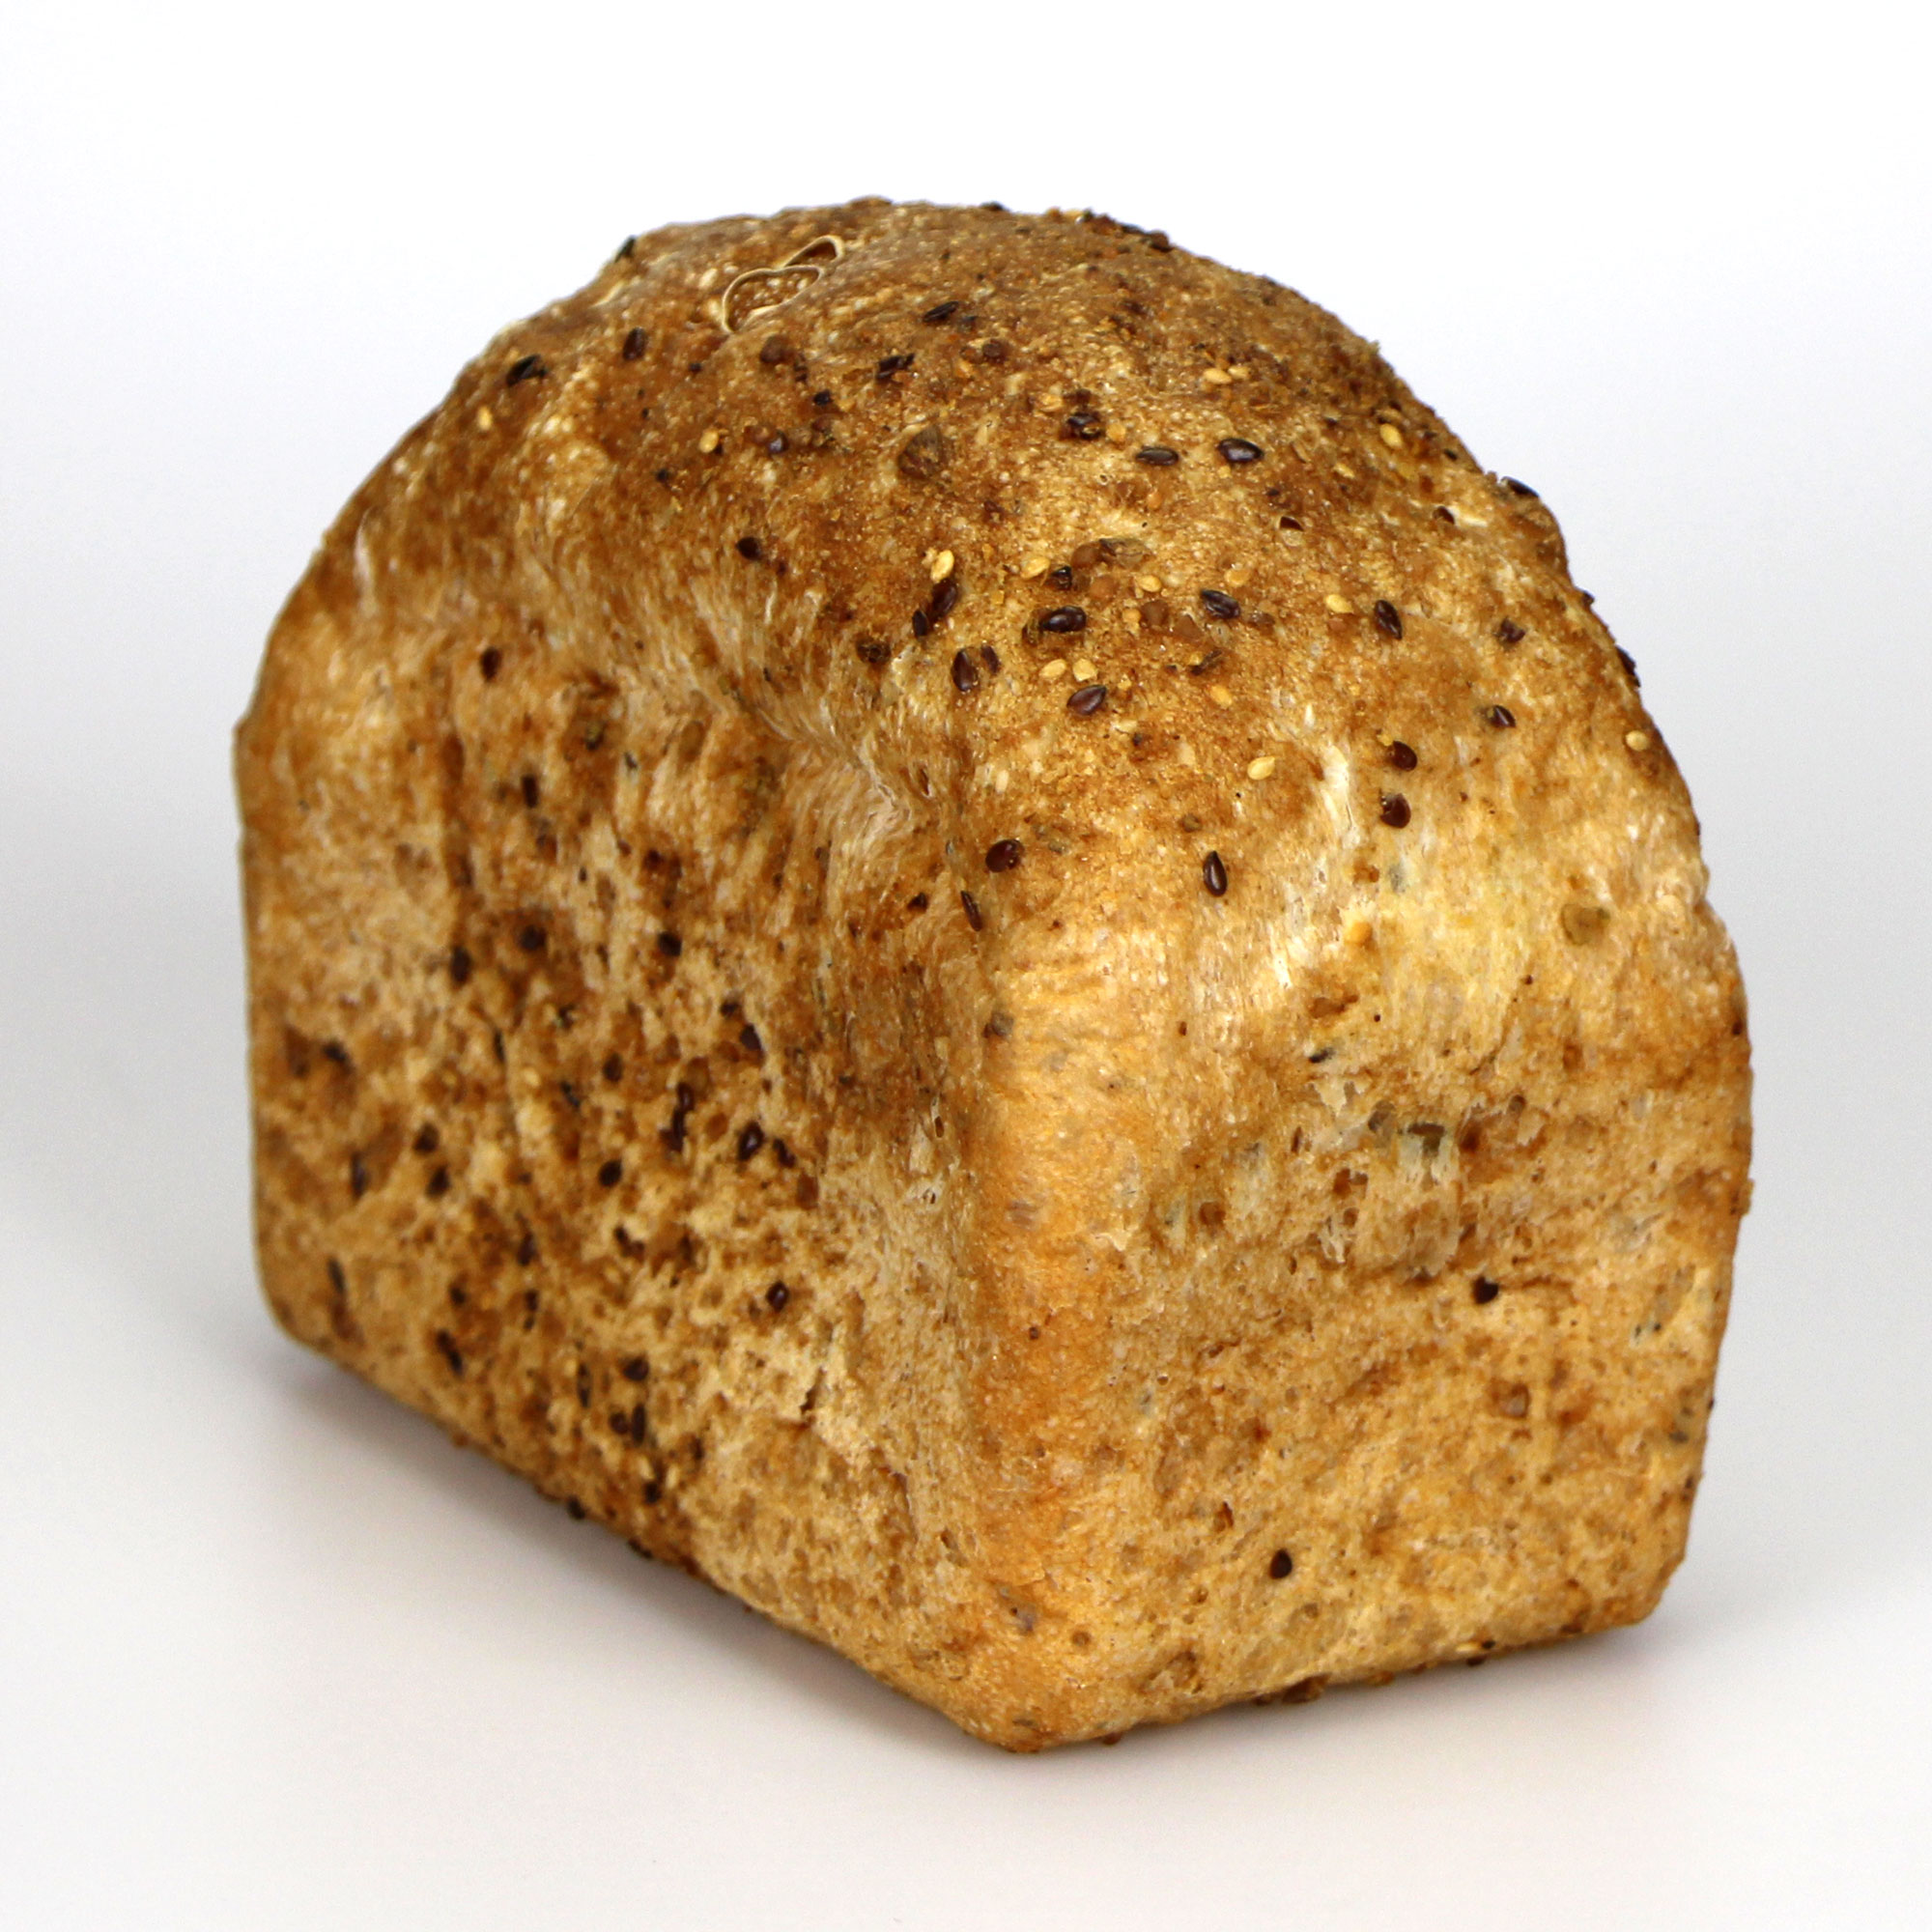 TenWaterloo Artificial Bread Loaf 8.5 Inches Long x 4.5 Inches Wide Seeded Bread Loaf for Display 